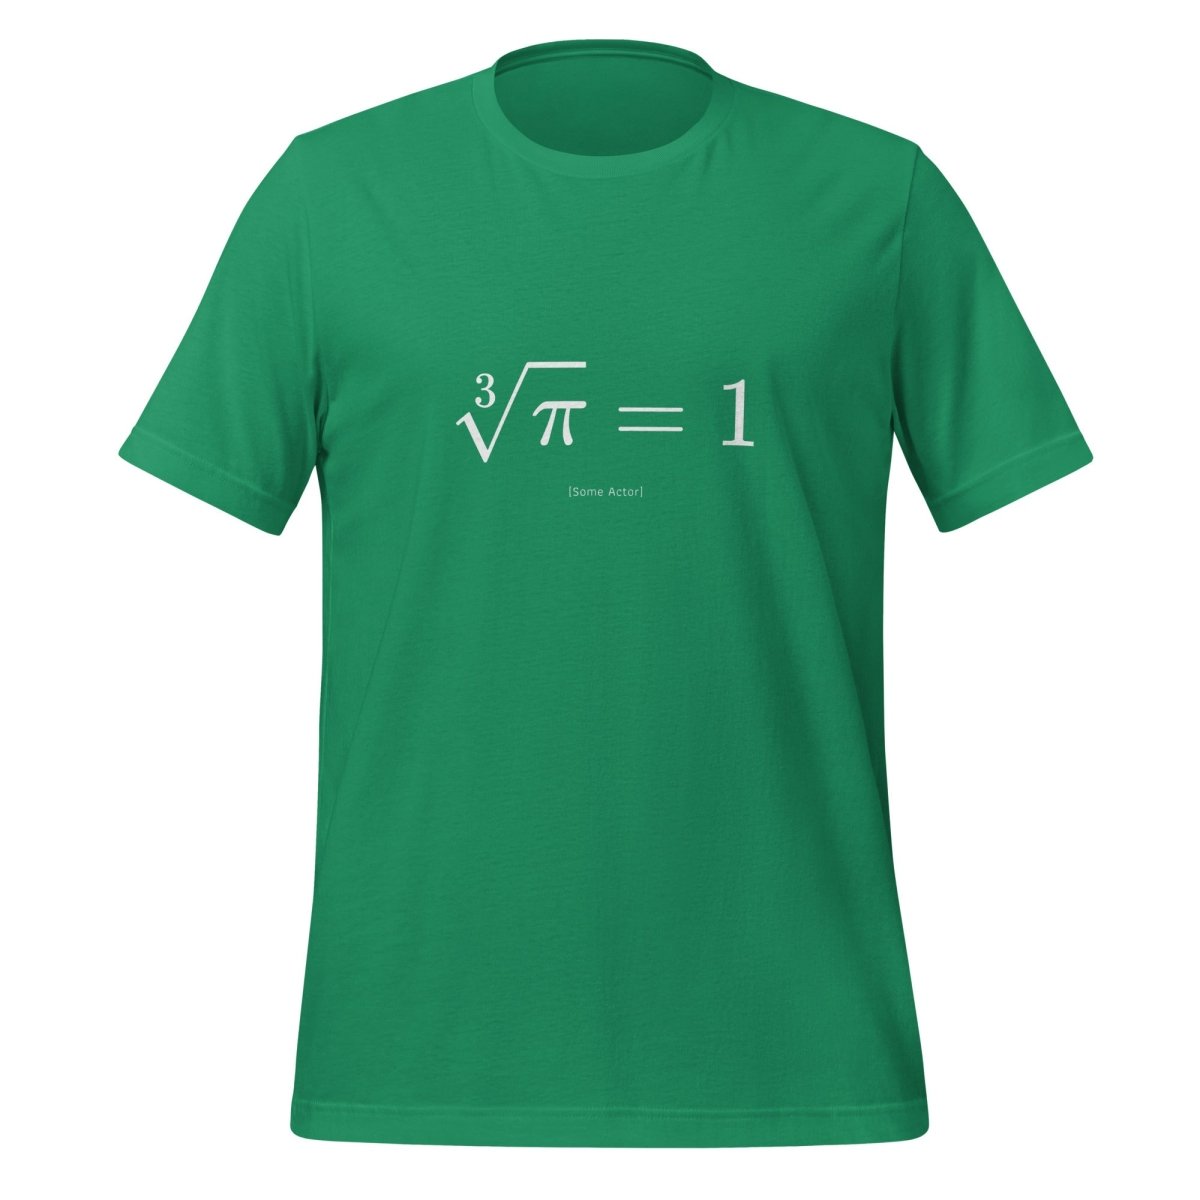 The Cube Root of Pi Equals 1 T - Shirt (unisex) - Kelly - AI Store